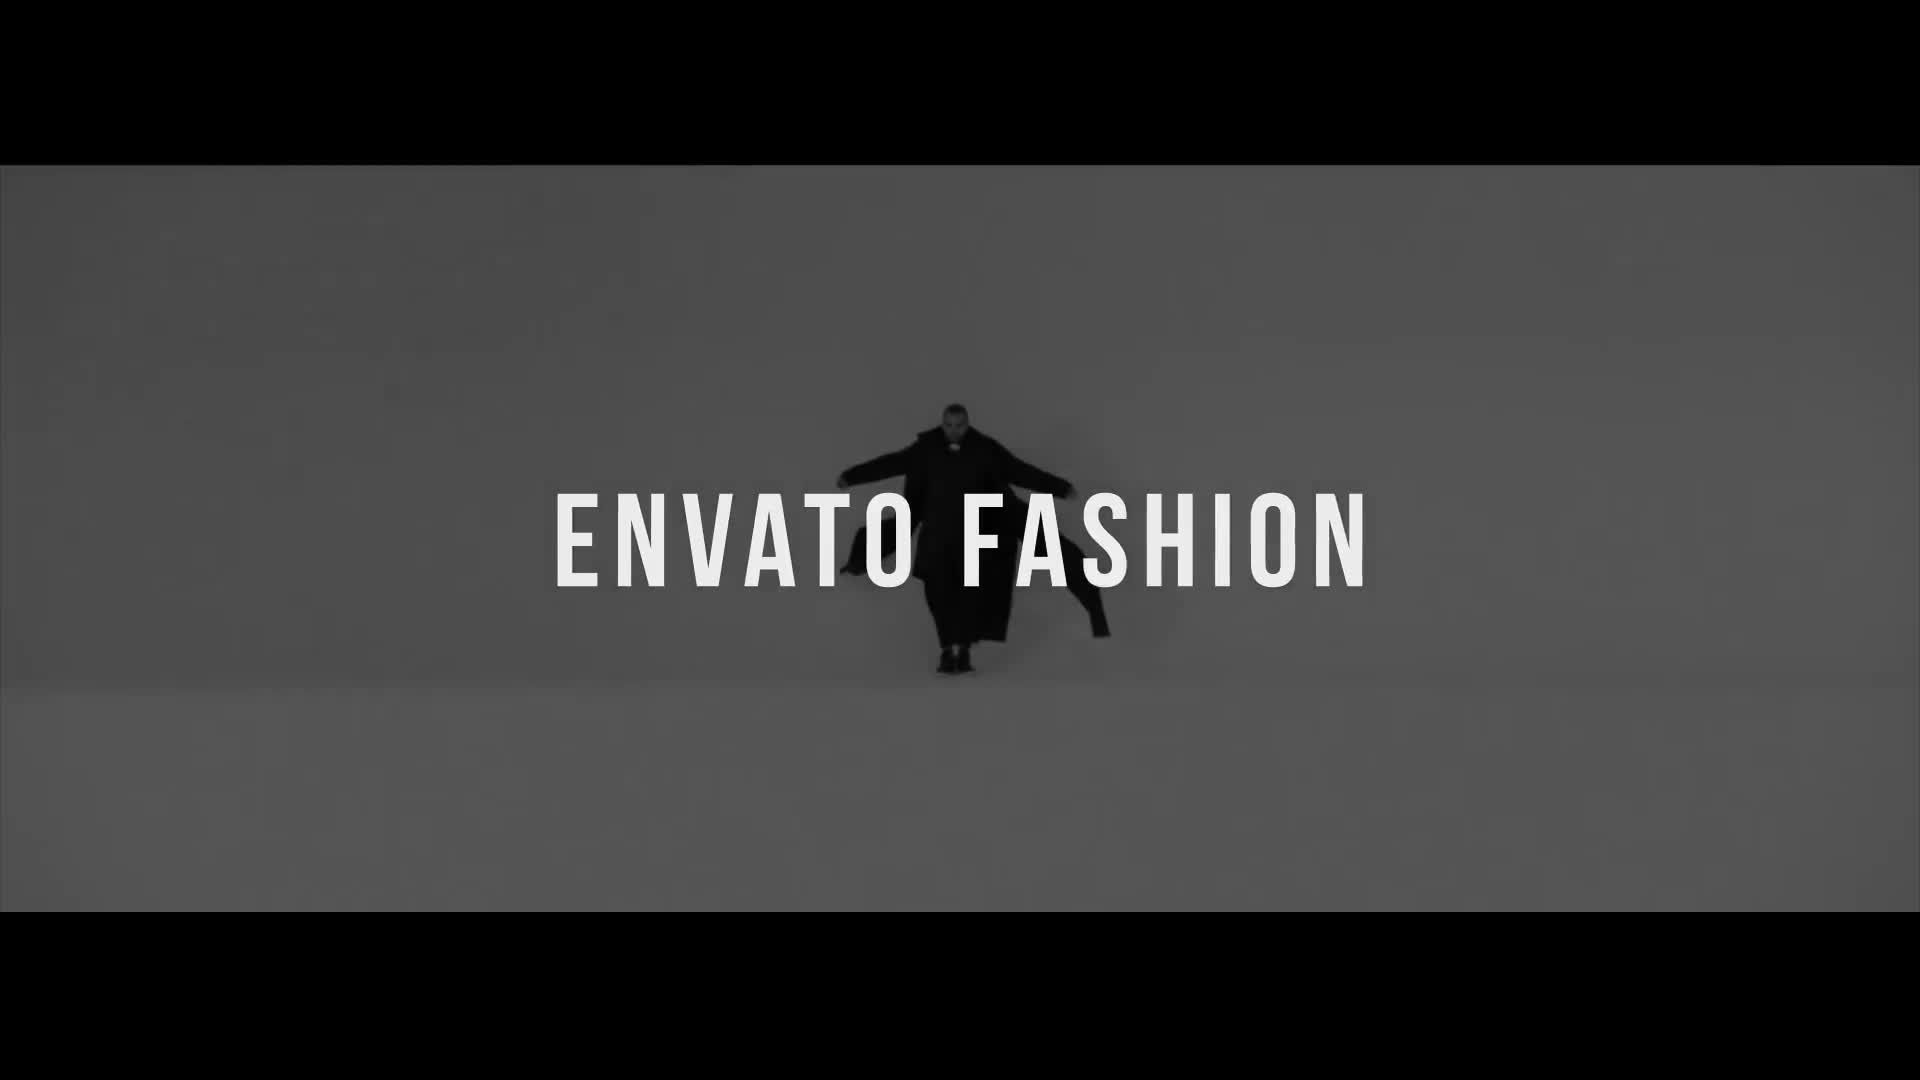 Dynamic Fashion Package - Download Videohive 19164699